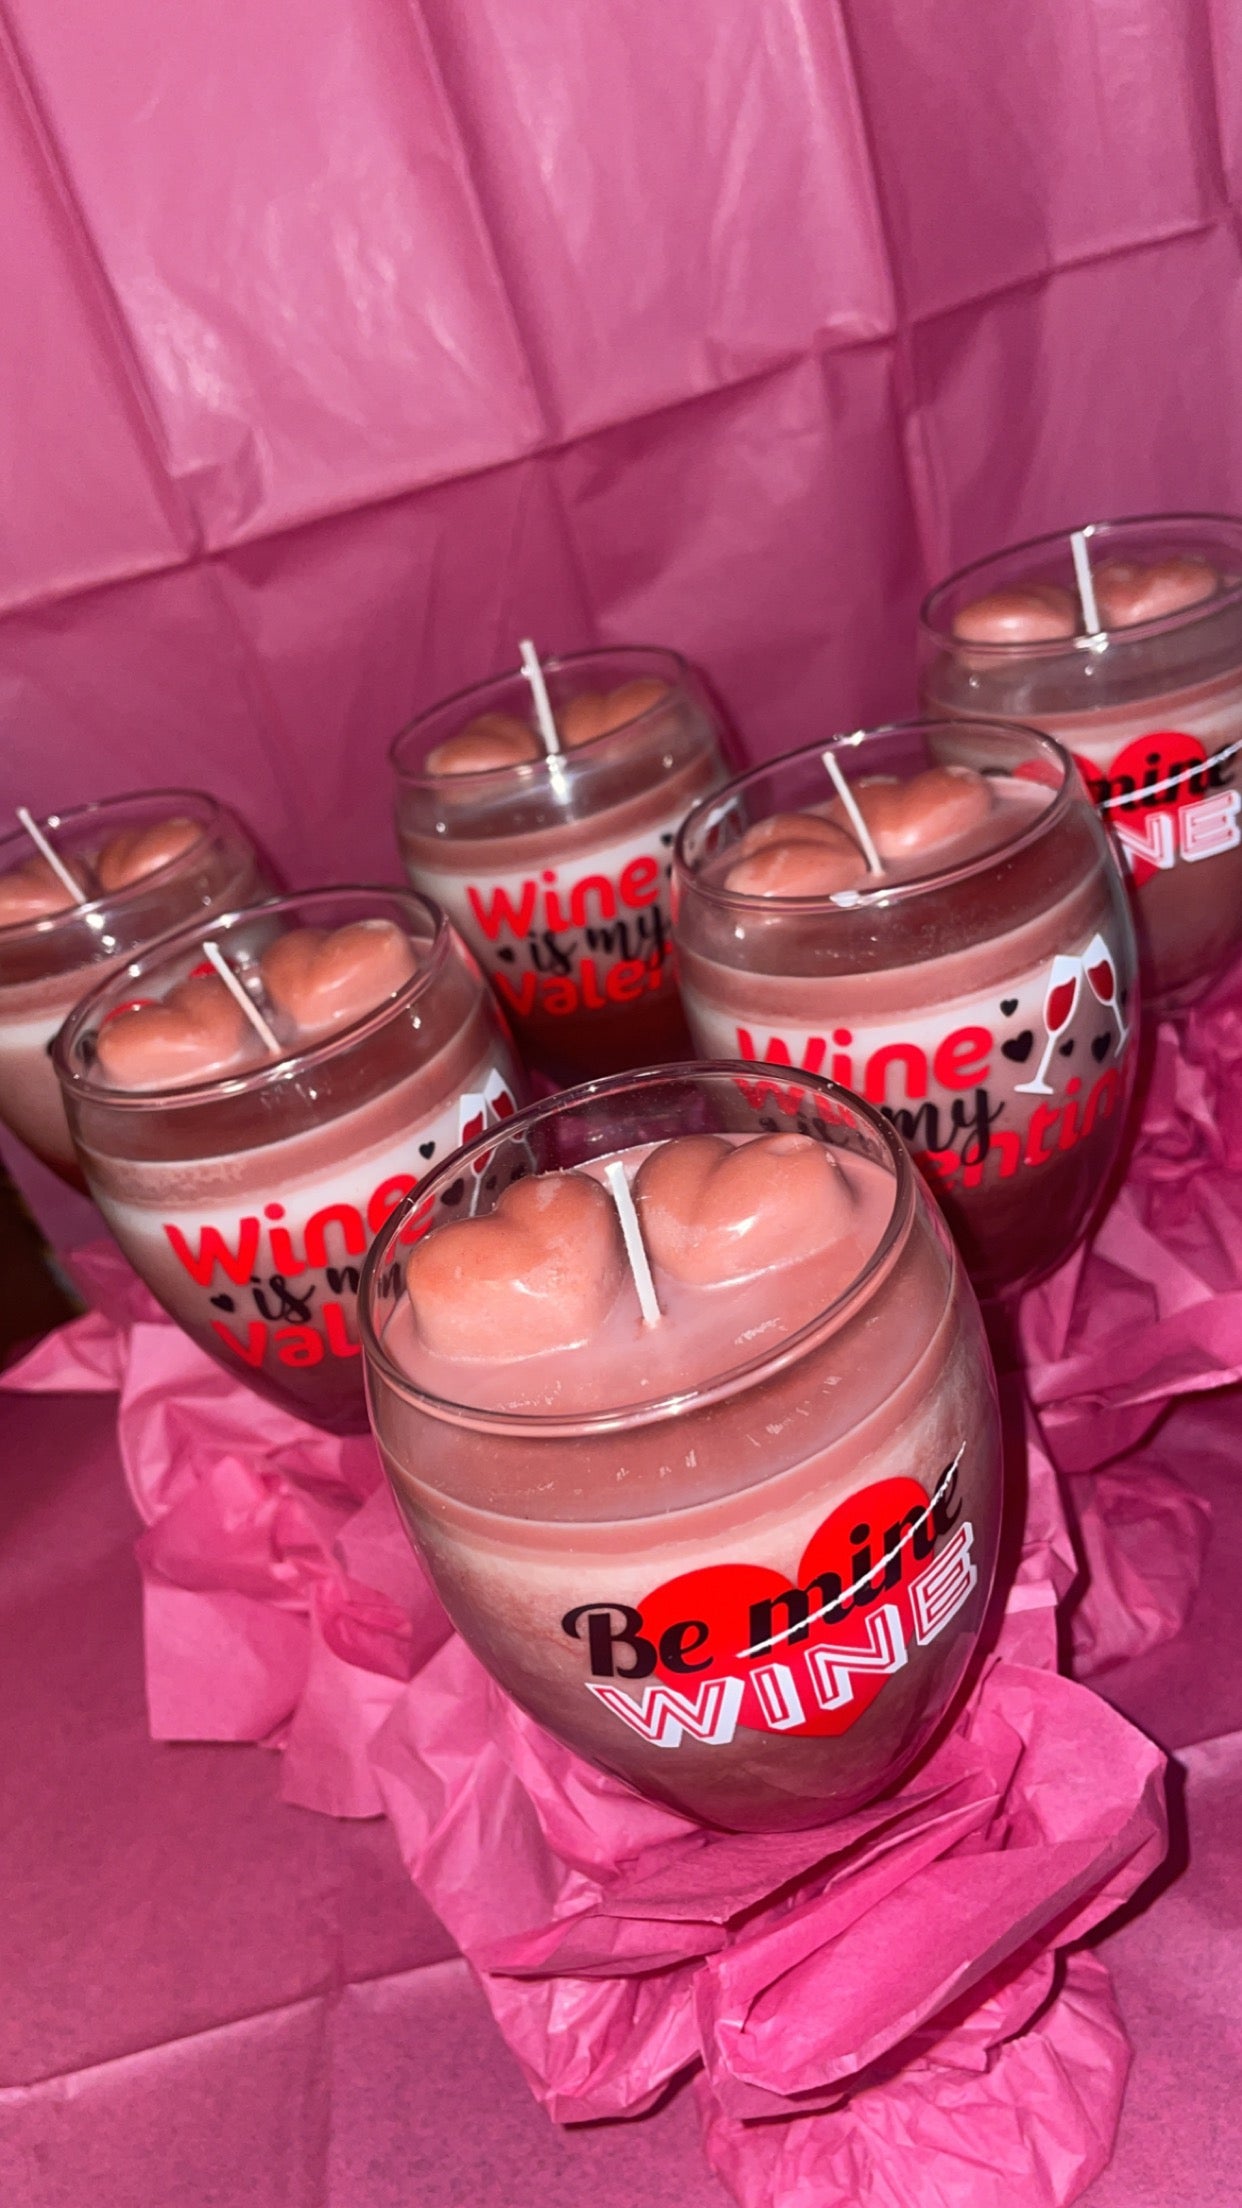 Valentines Day Candles